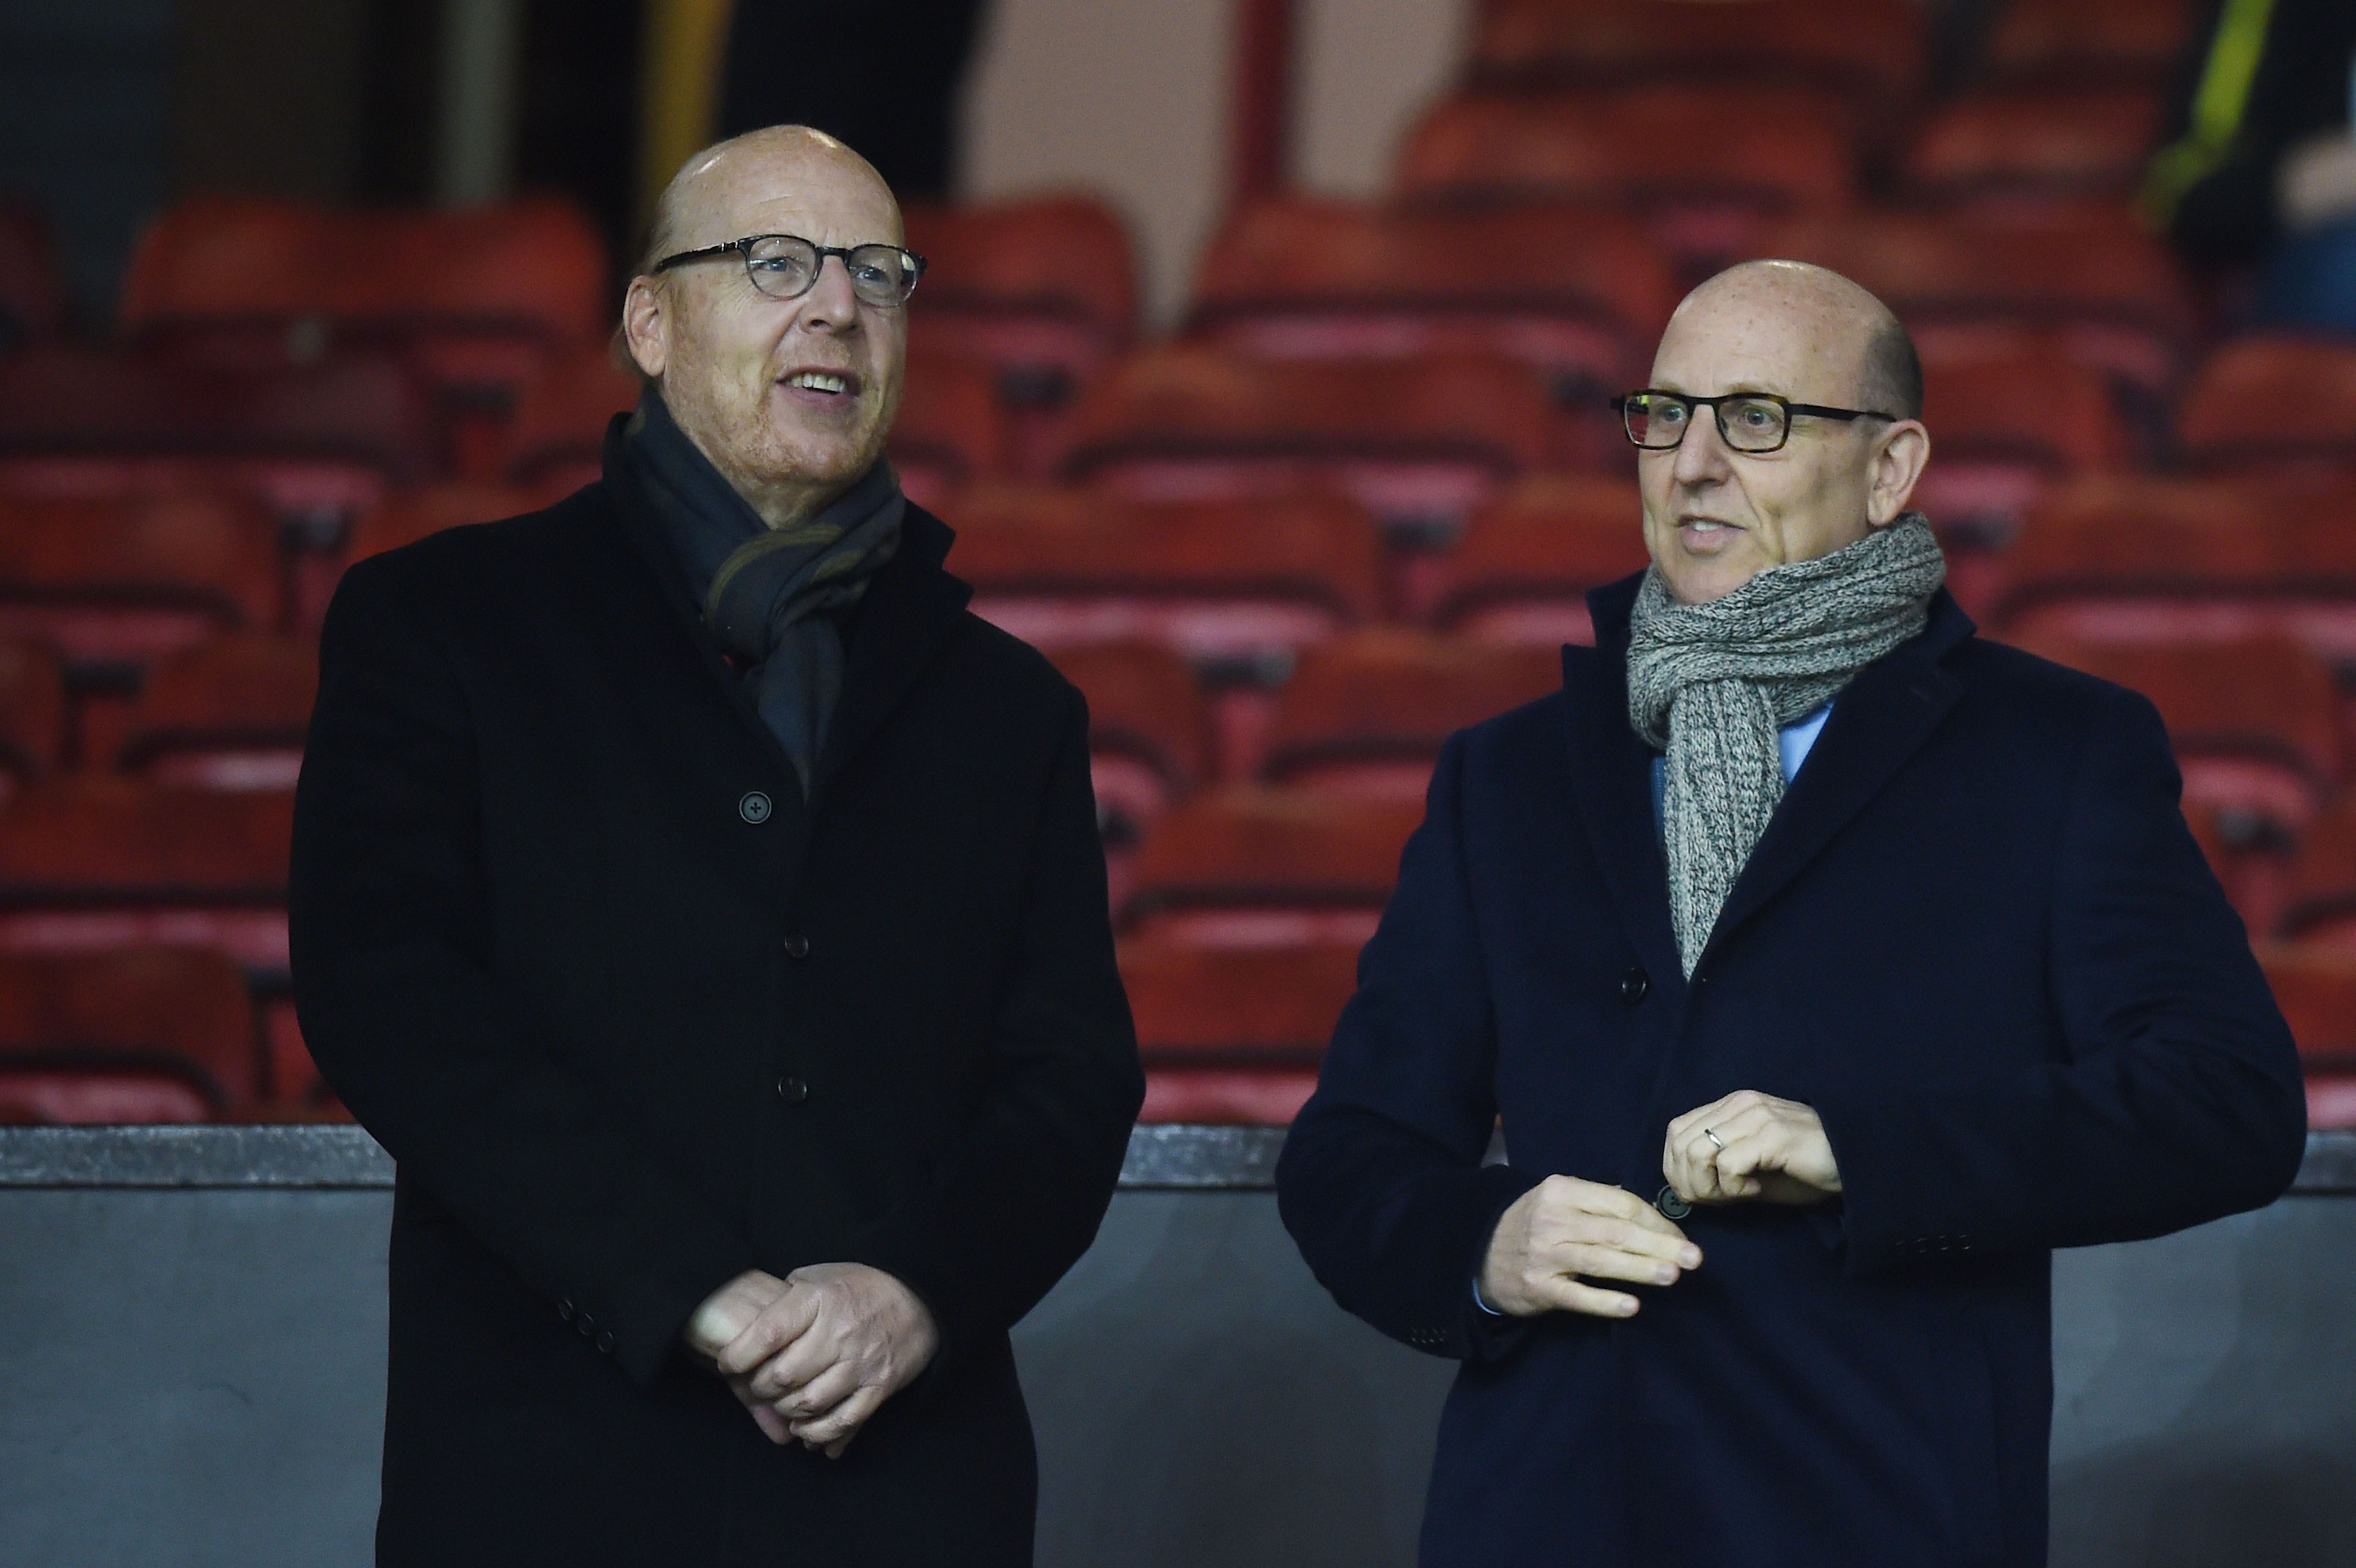 Record $75M Deal Suggests Glazers May Never Sell Man United